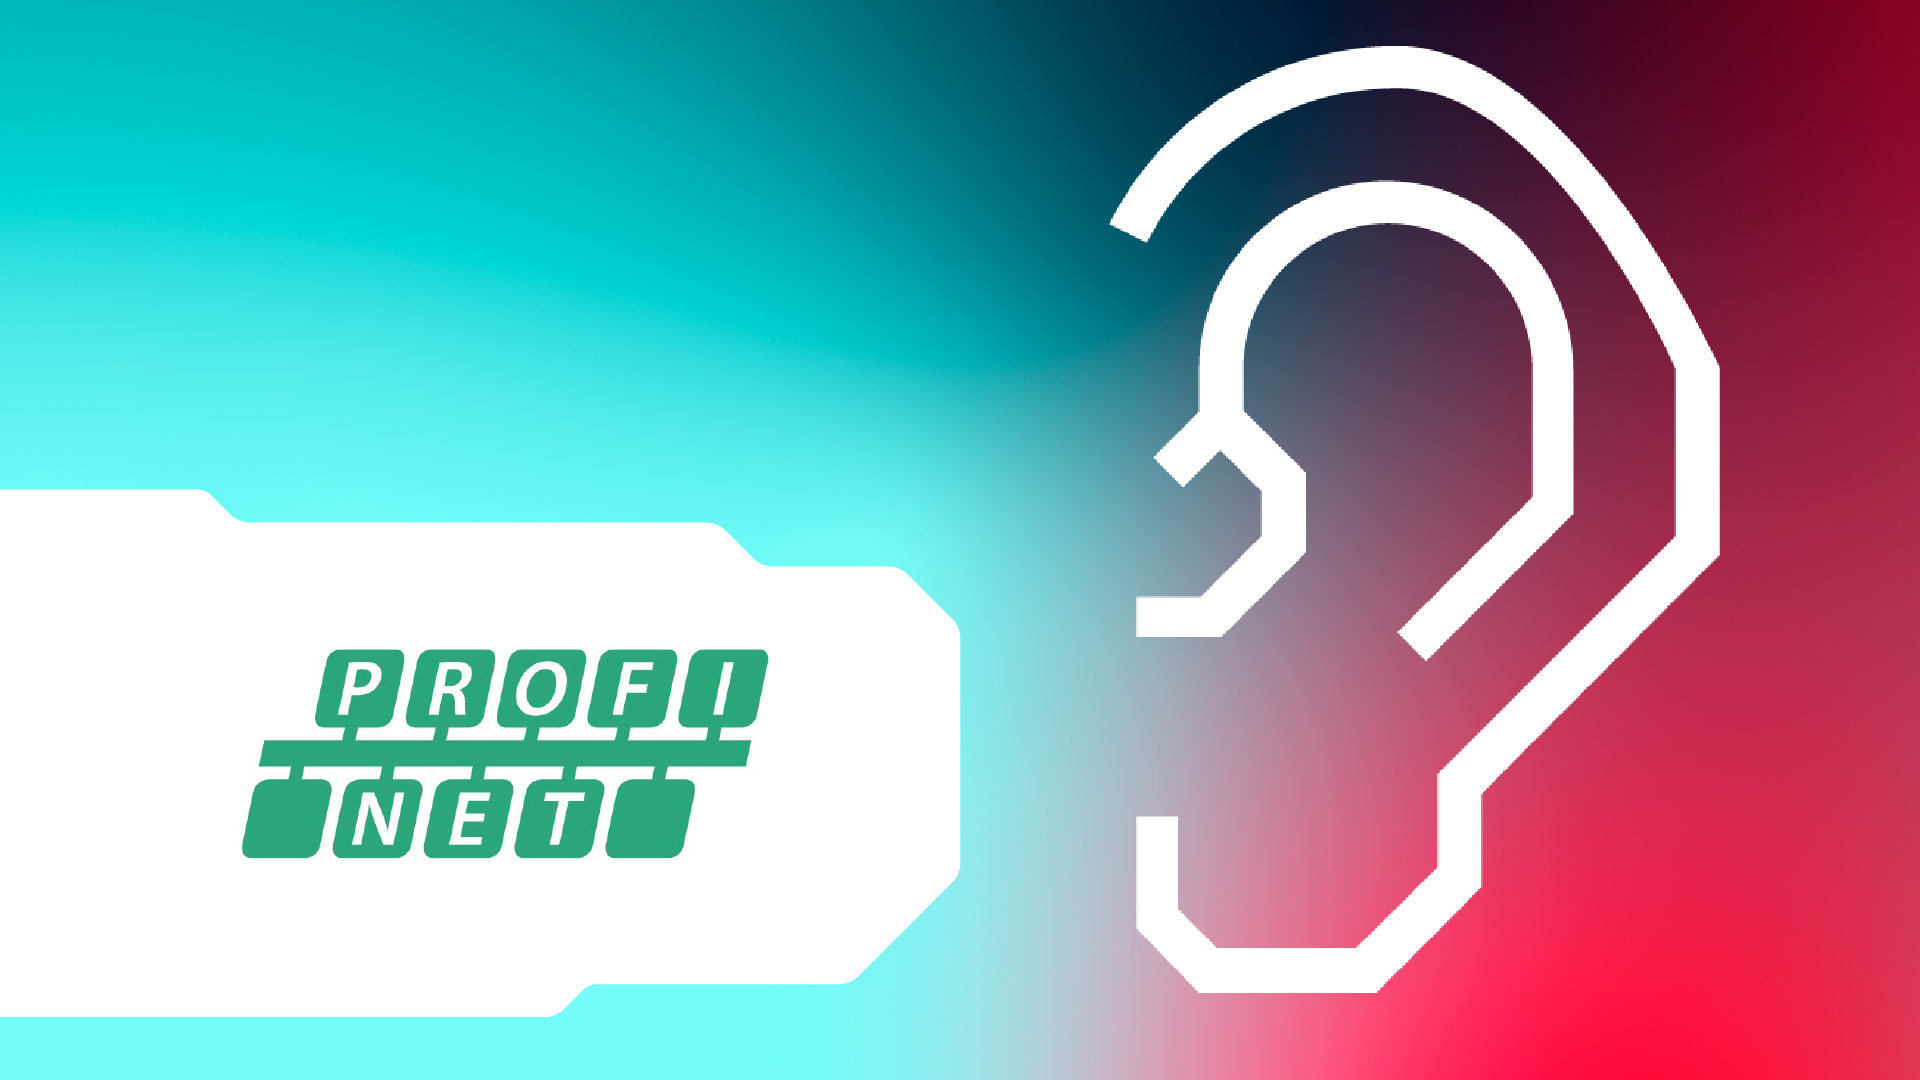 A stylized ear on a colourful background. The PROFINET logo can be seen on the left side.